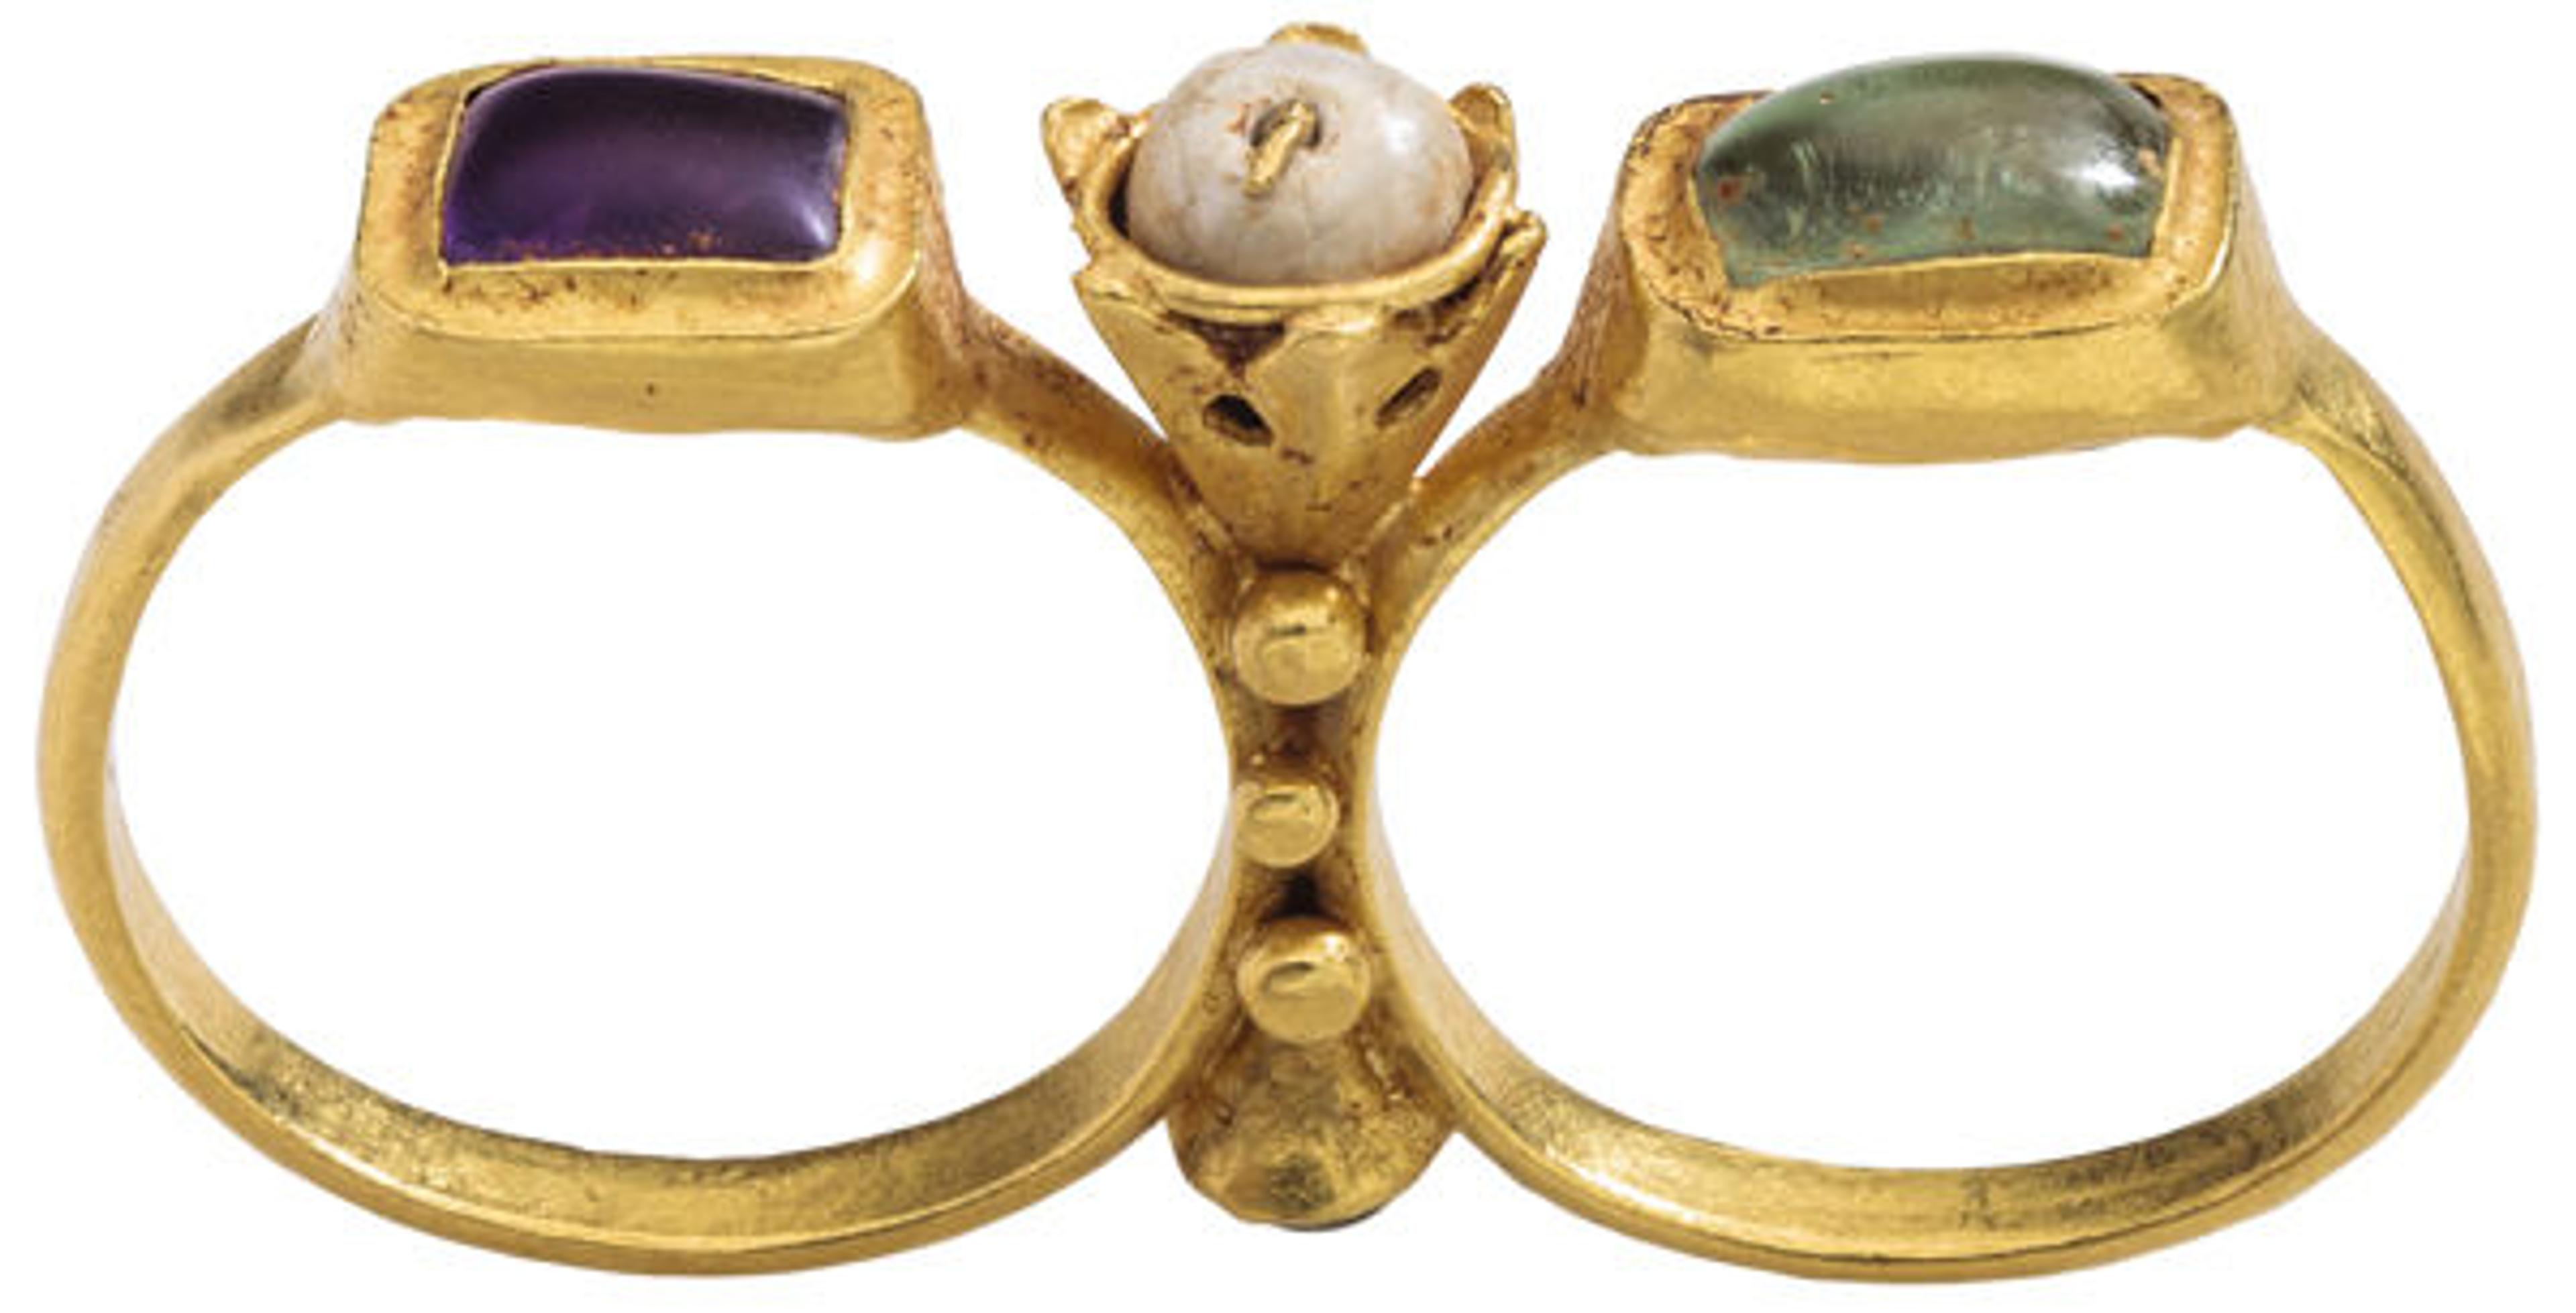 Two-Finger Ring, early 6th century. Byzantine. Gold, amethyst, emerald, glass, pearl; Height 27 mm.; length 45.7 mm.; weight 11.79 g.; US 10 and 10.25, UK. Griffin Collection